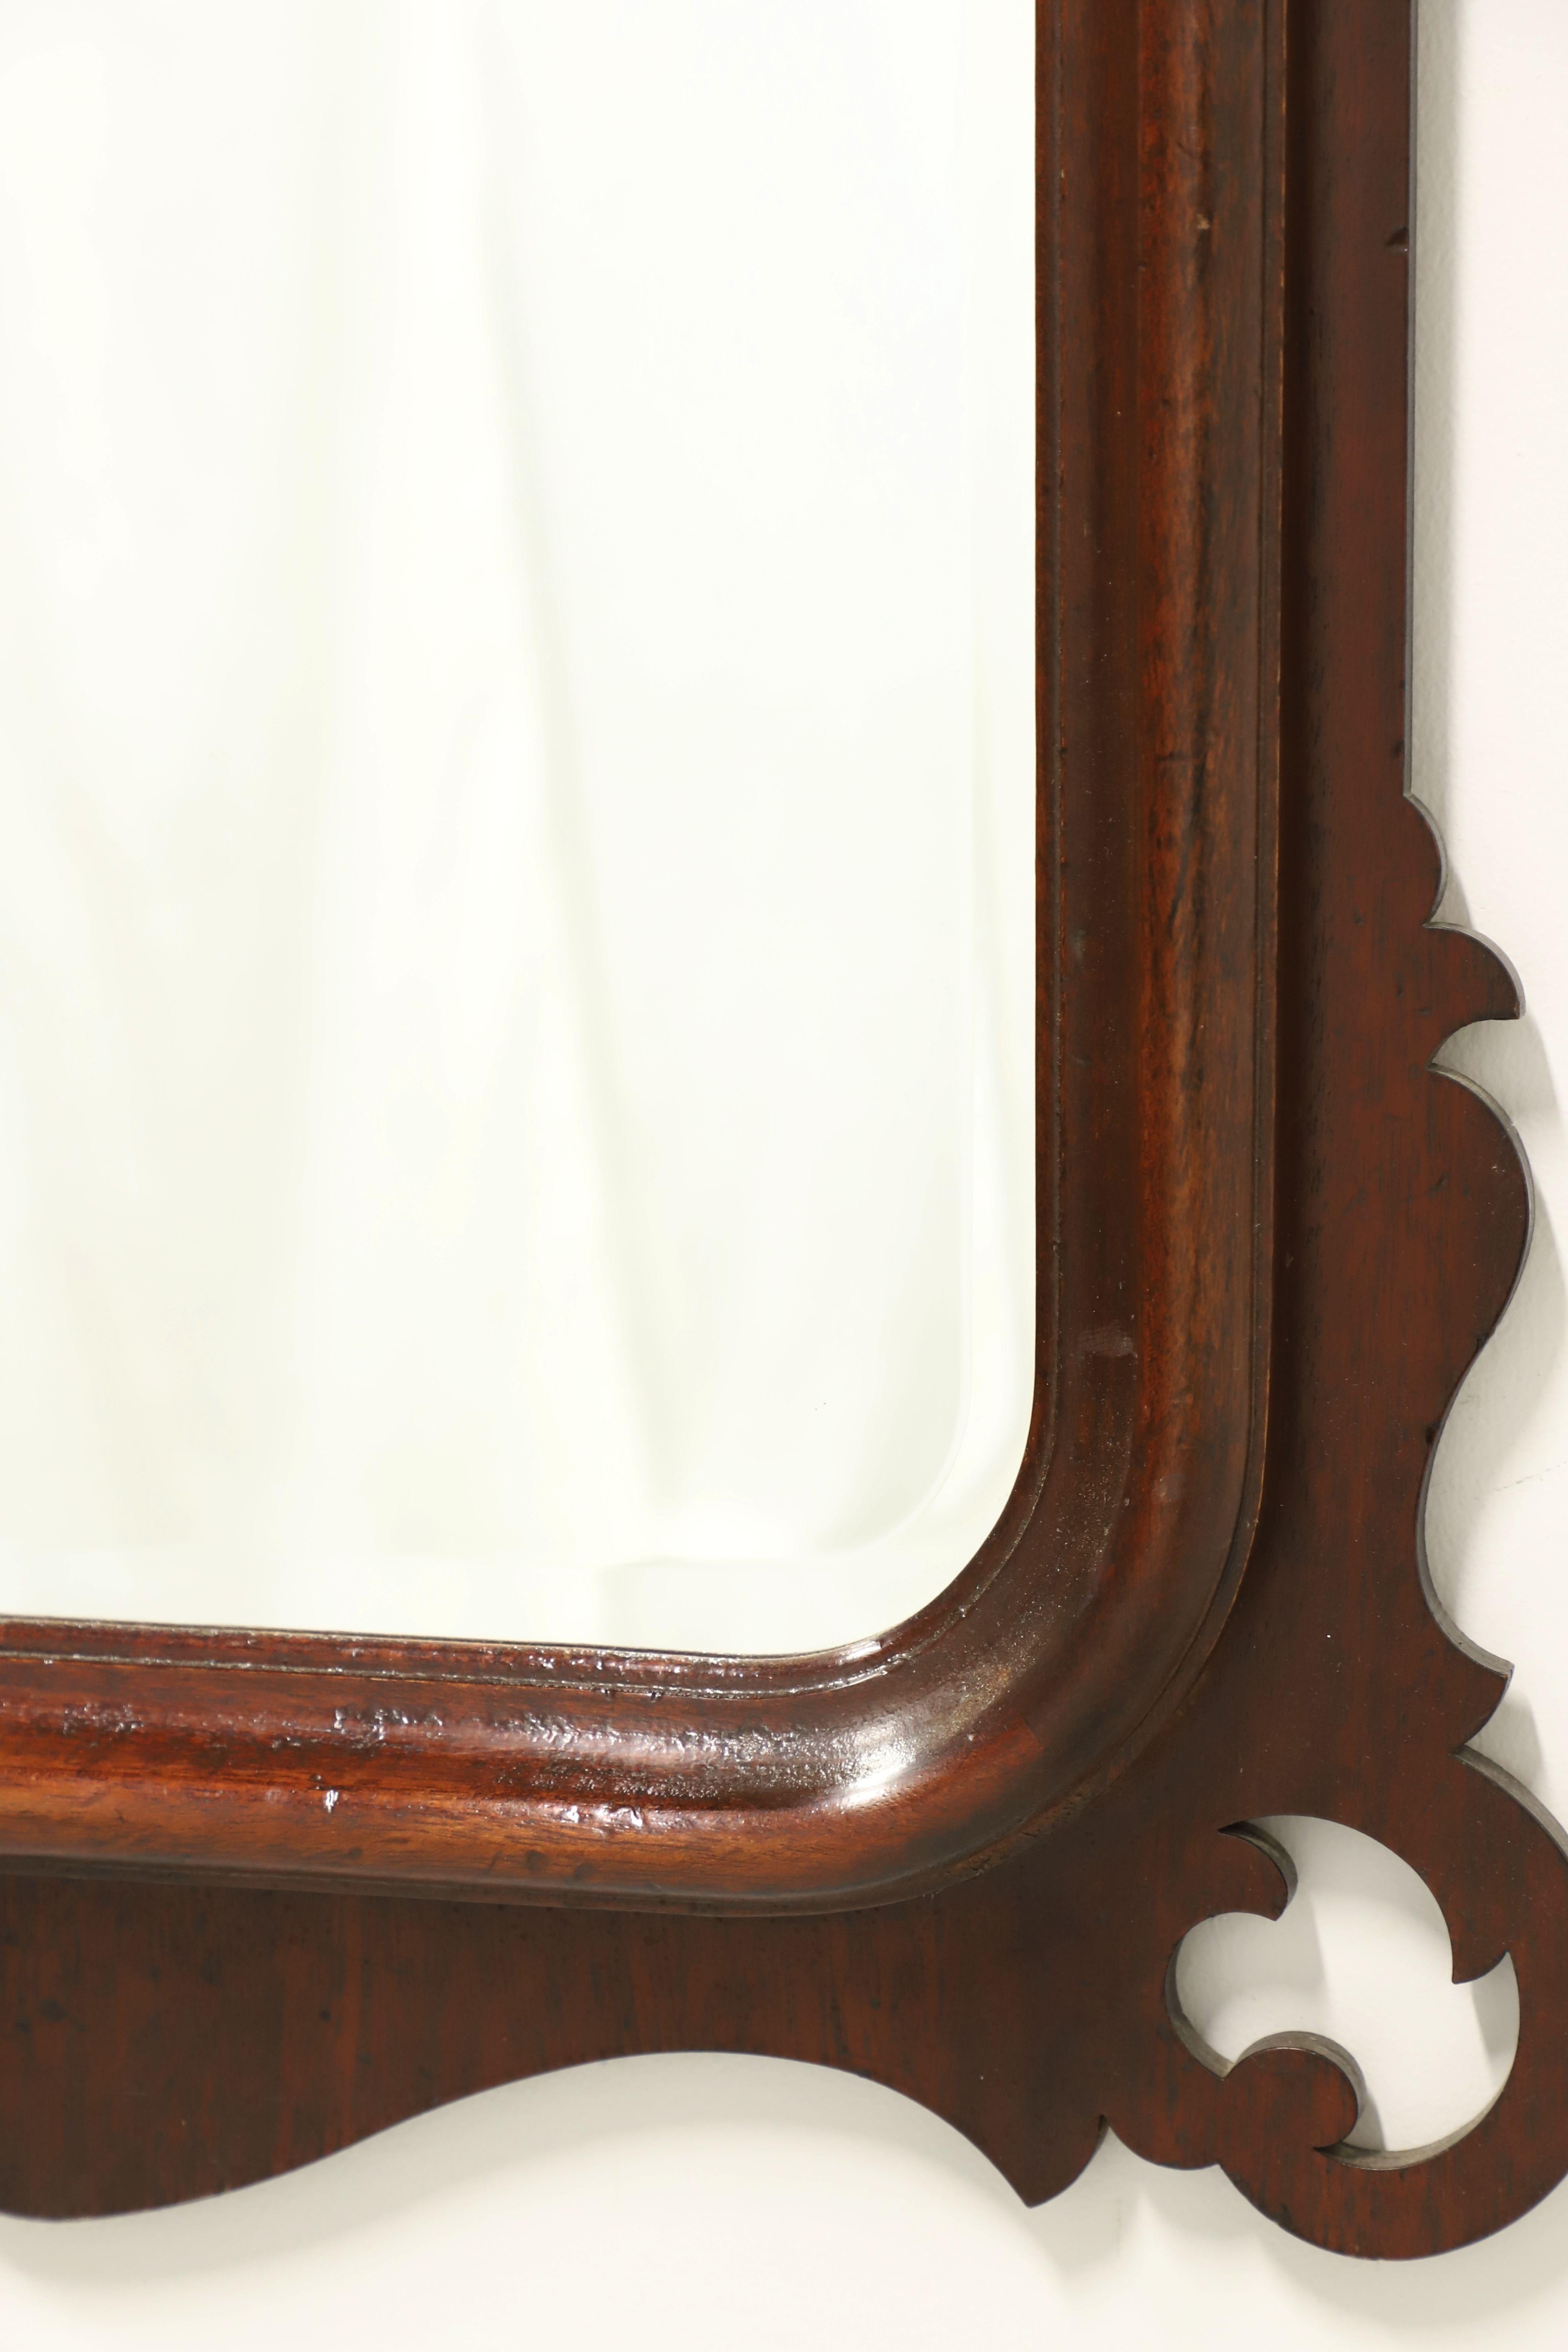 LEXINGTON Distressed Mahogany Chippendale Style Beveled Wall Mirror For Sale 1